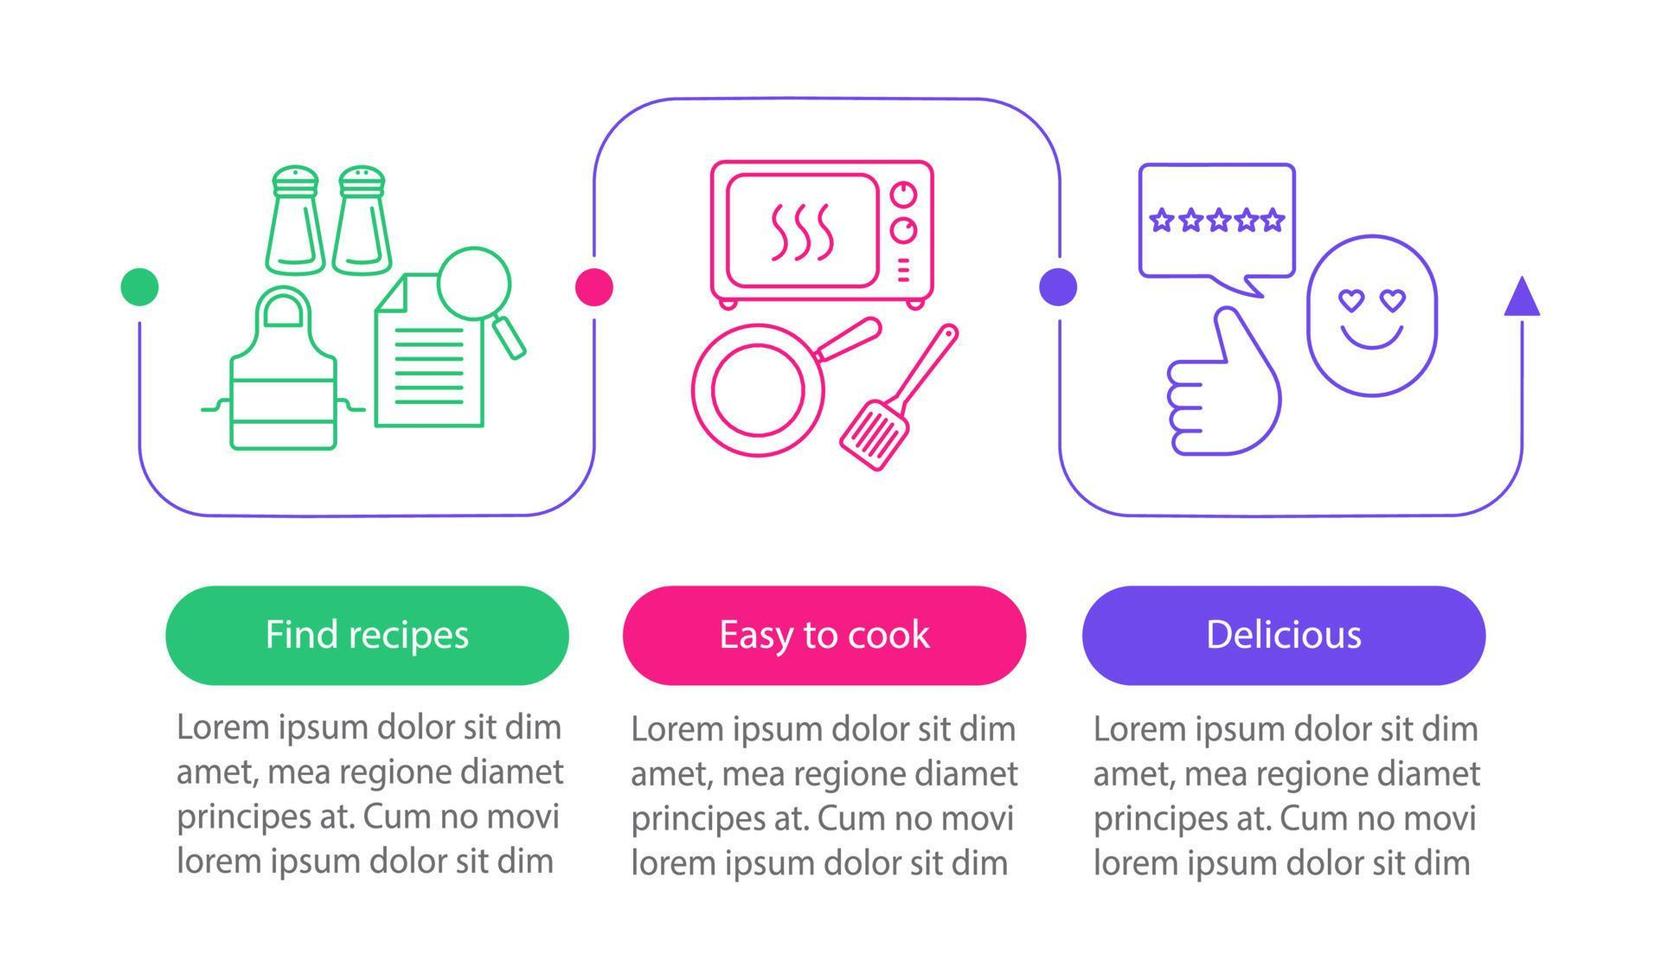 Food cooking vector infographic template. Find recipes, meal preparation, delicious dish. Data visualization with three steps and options. Process timeline chart. Workflow layout with icons